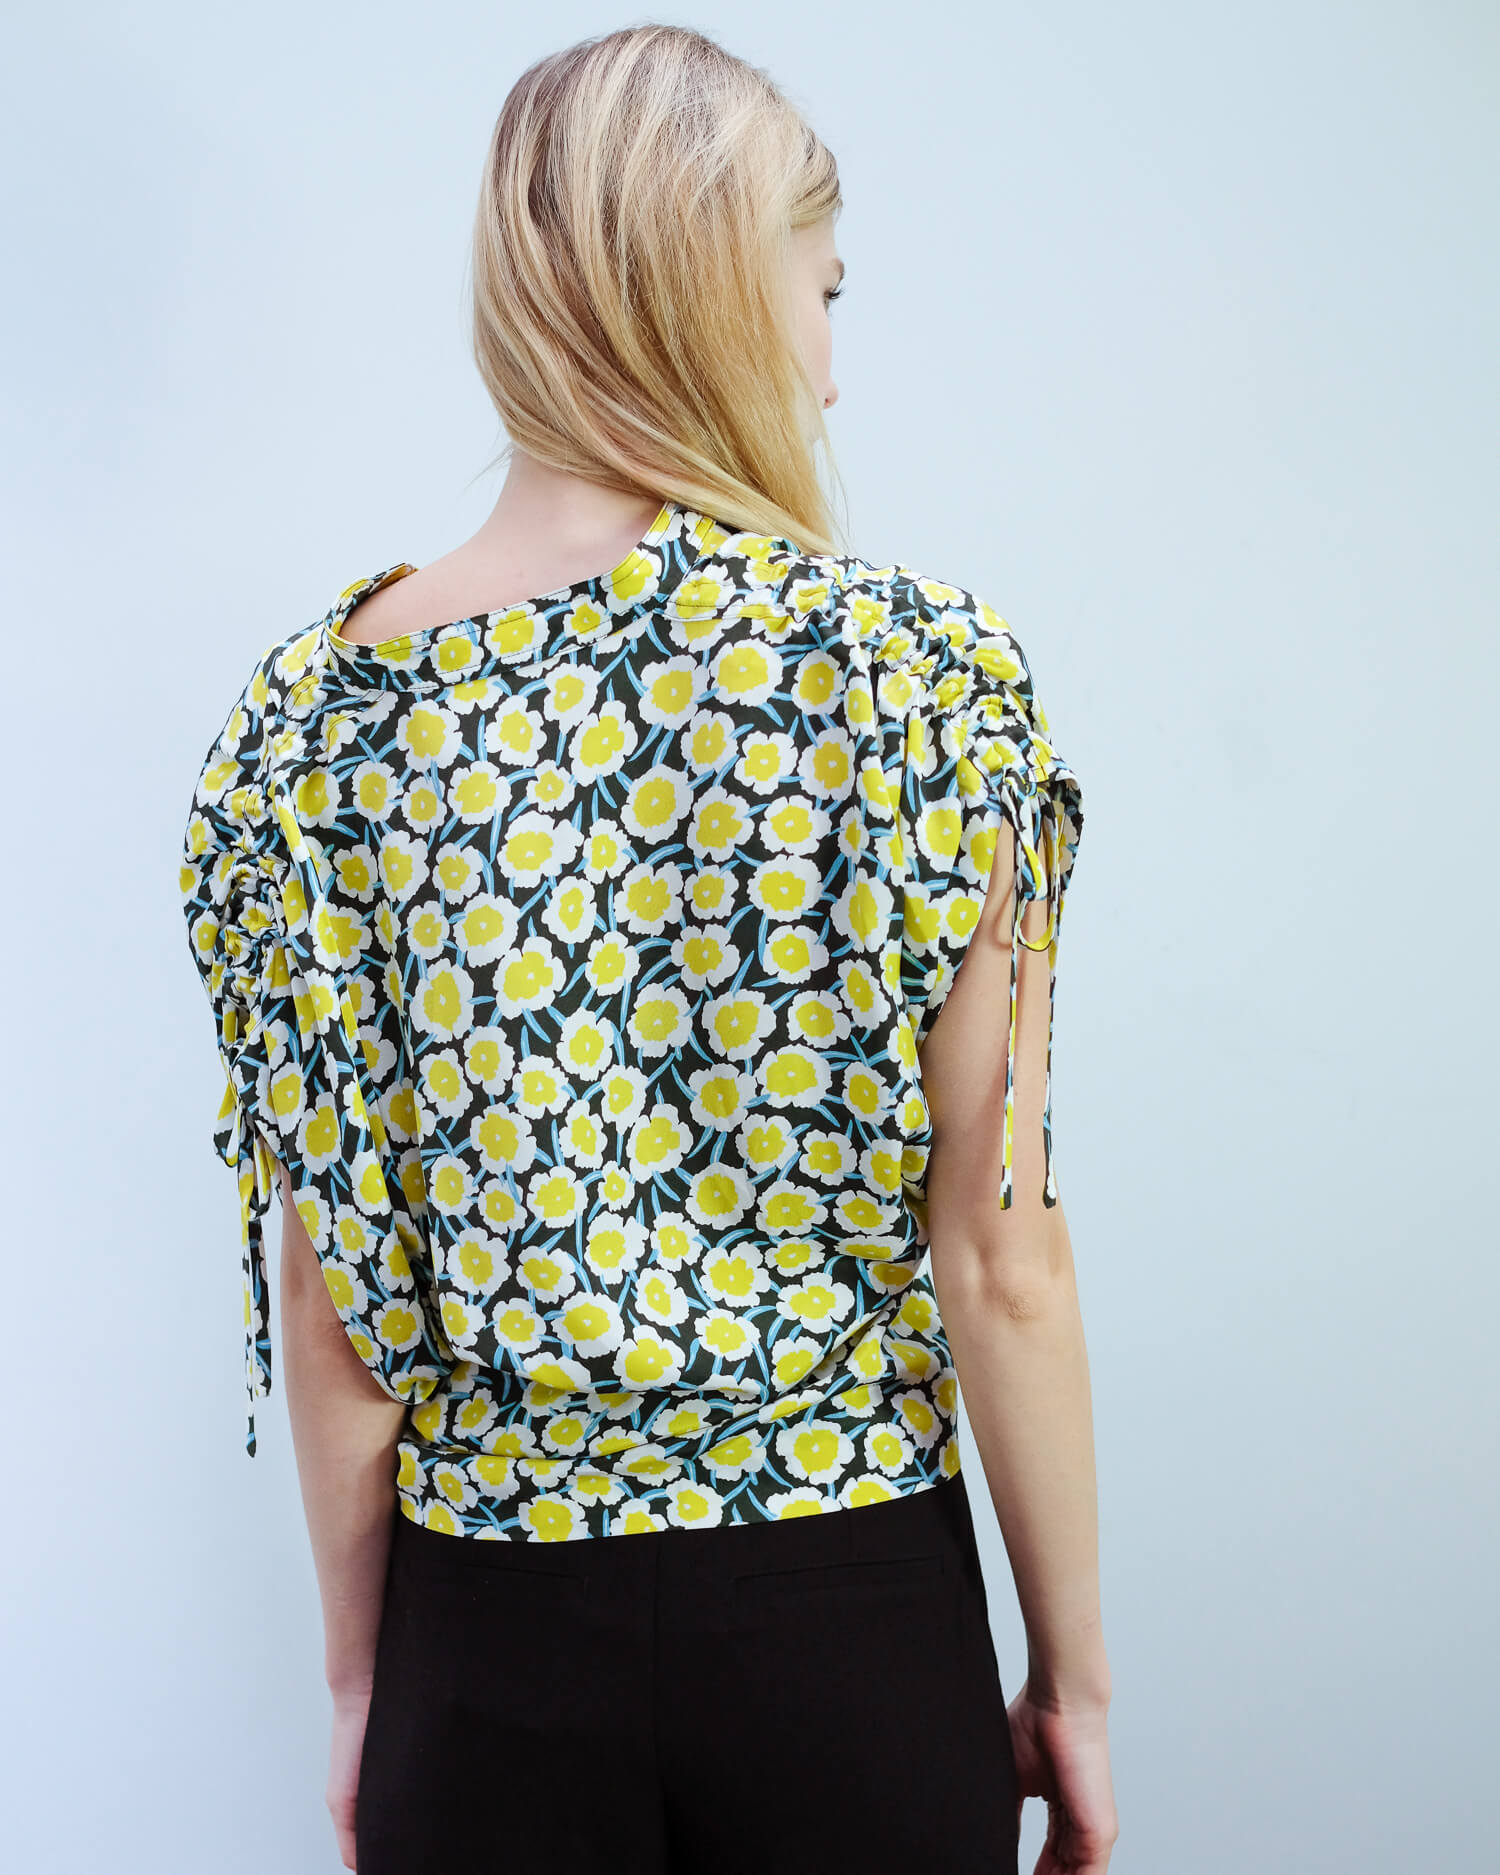 DVF Grania top in daisies canteen